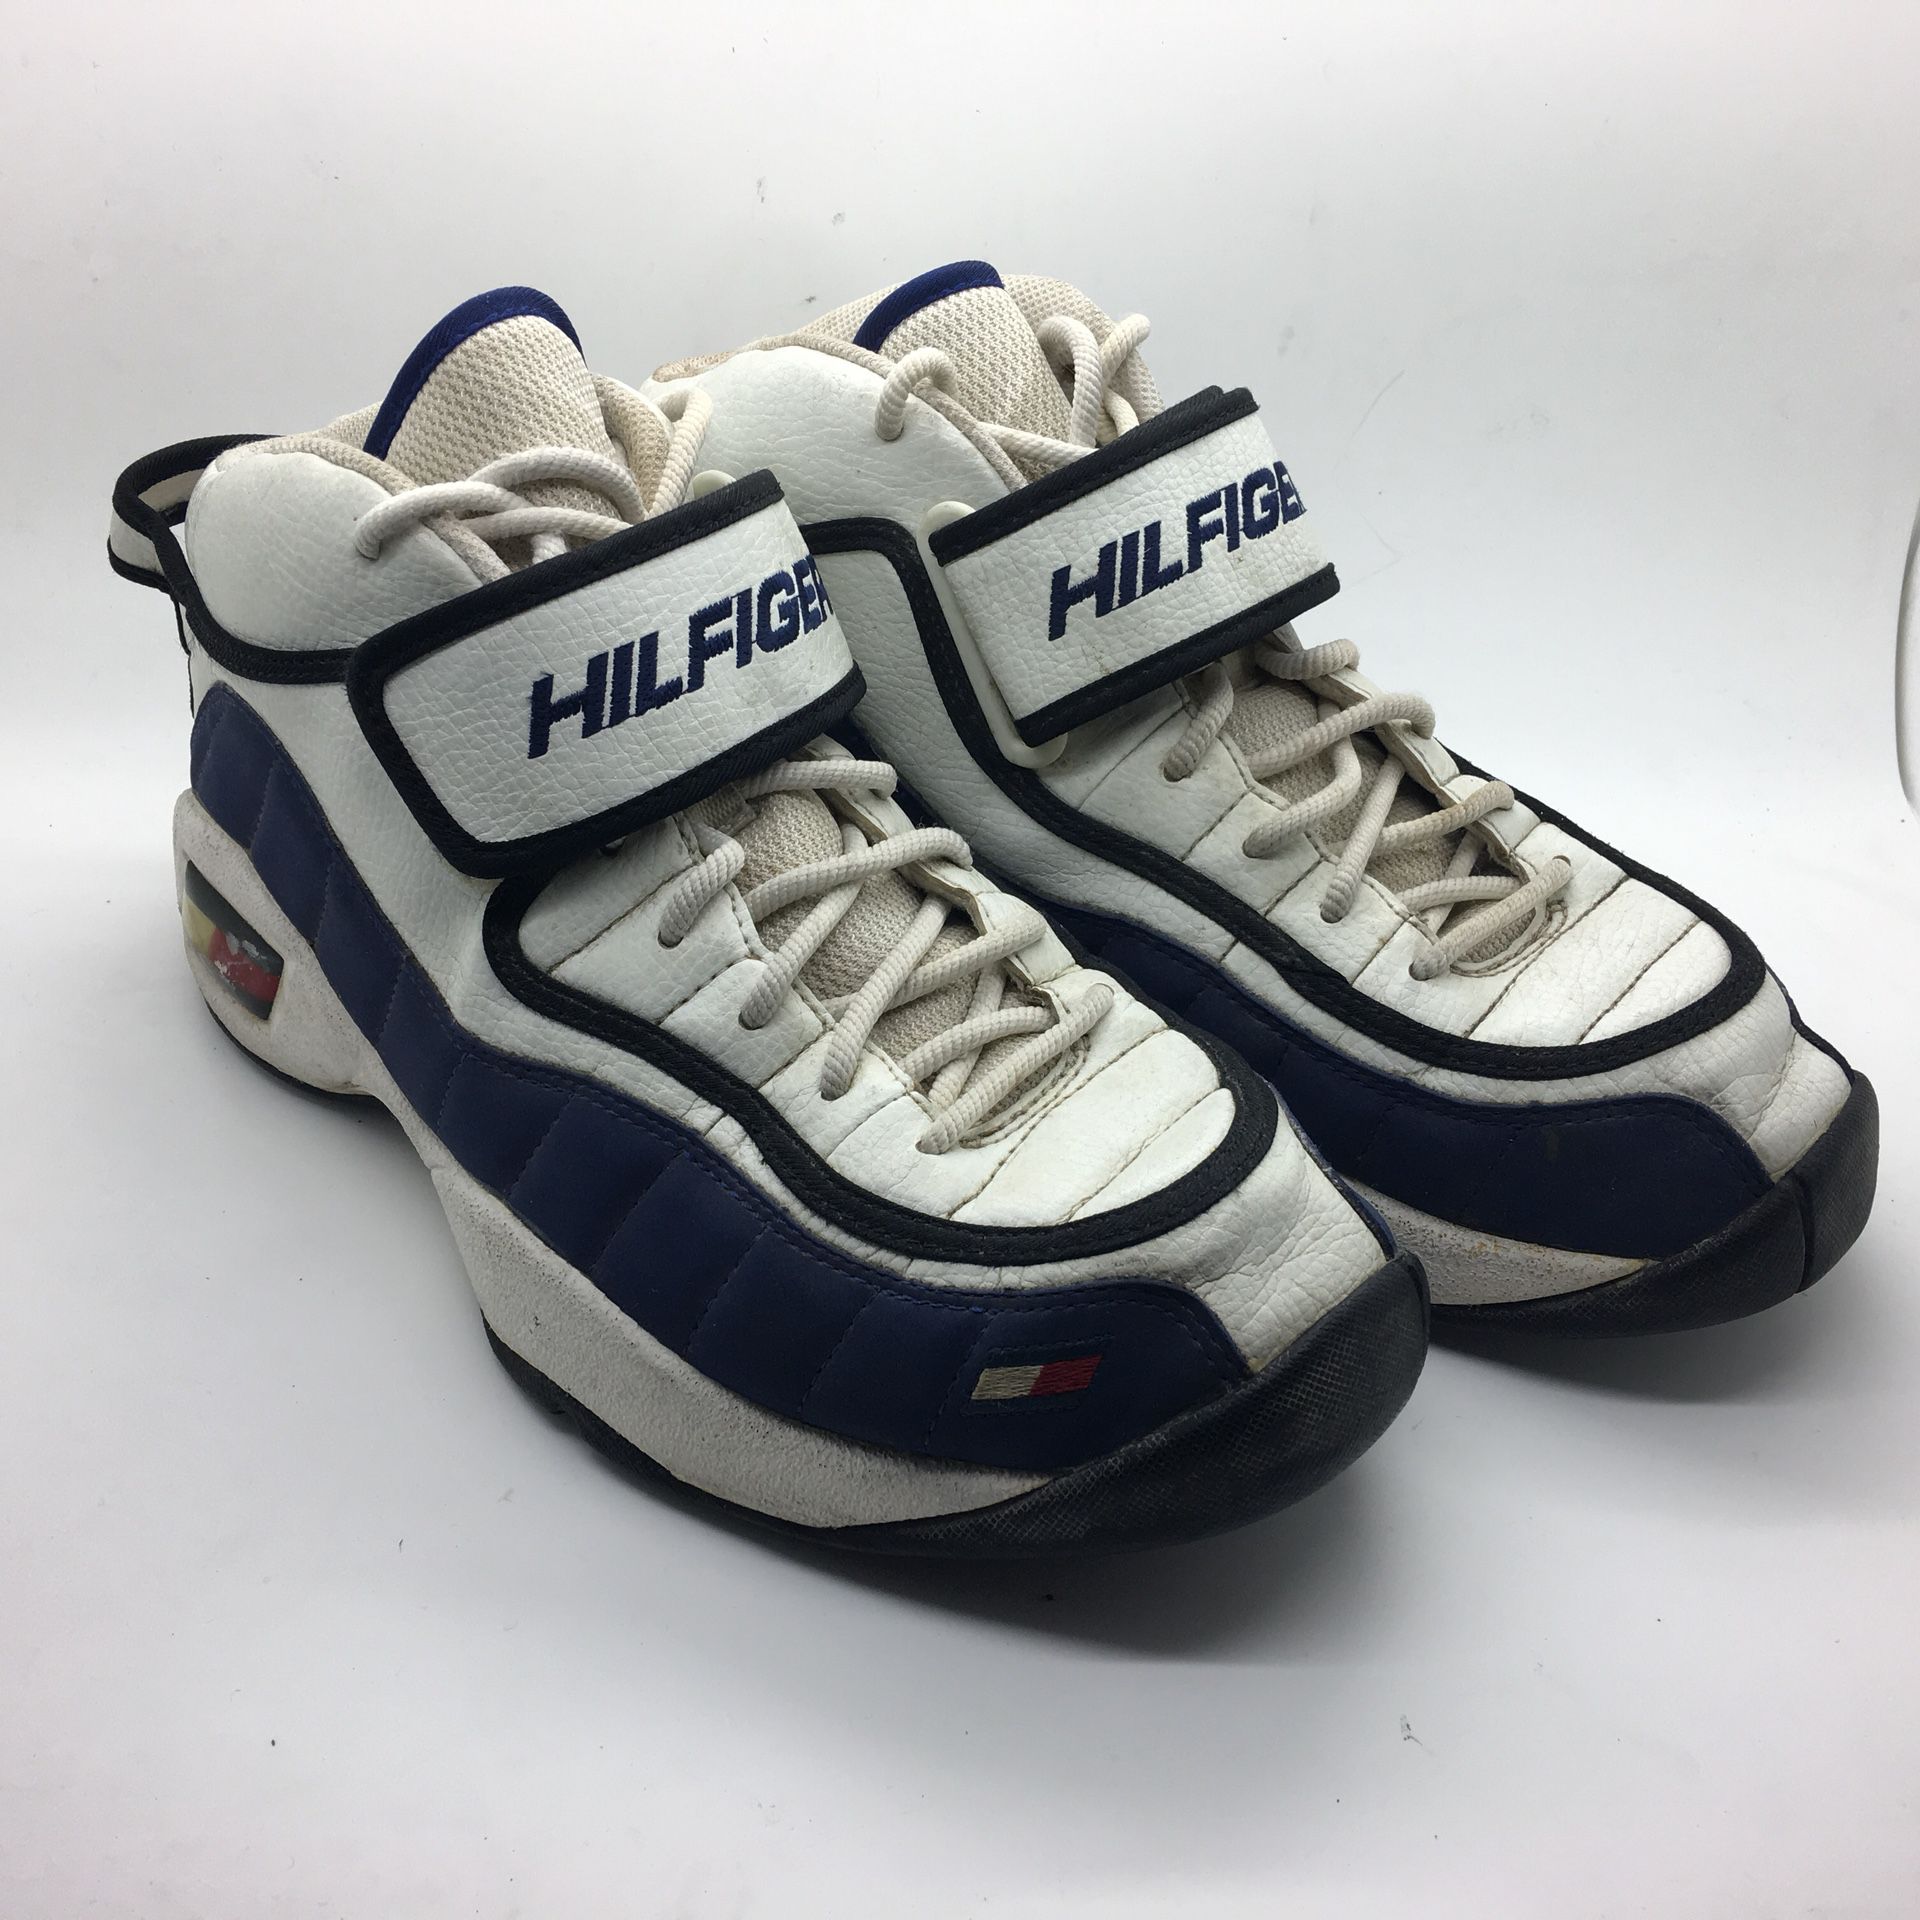 Rare Tommy Hilfiger M71060 Basketball Shoes Mens 10 for Sale in Shoreline,  WA - OfferUp